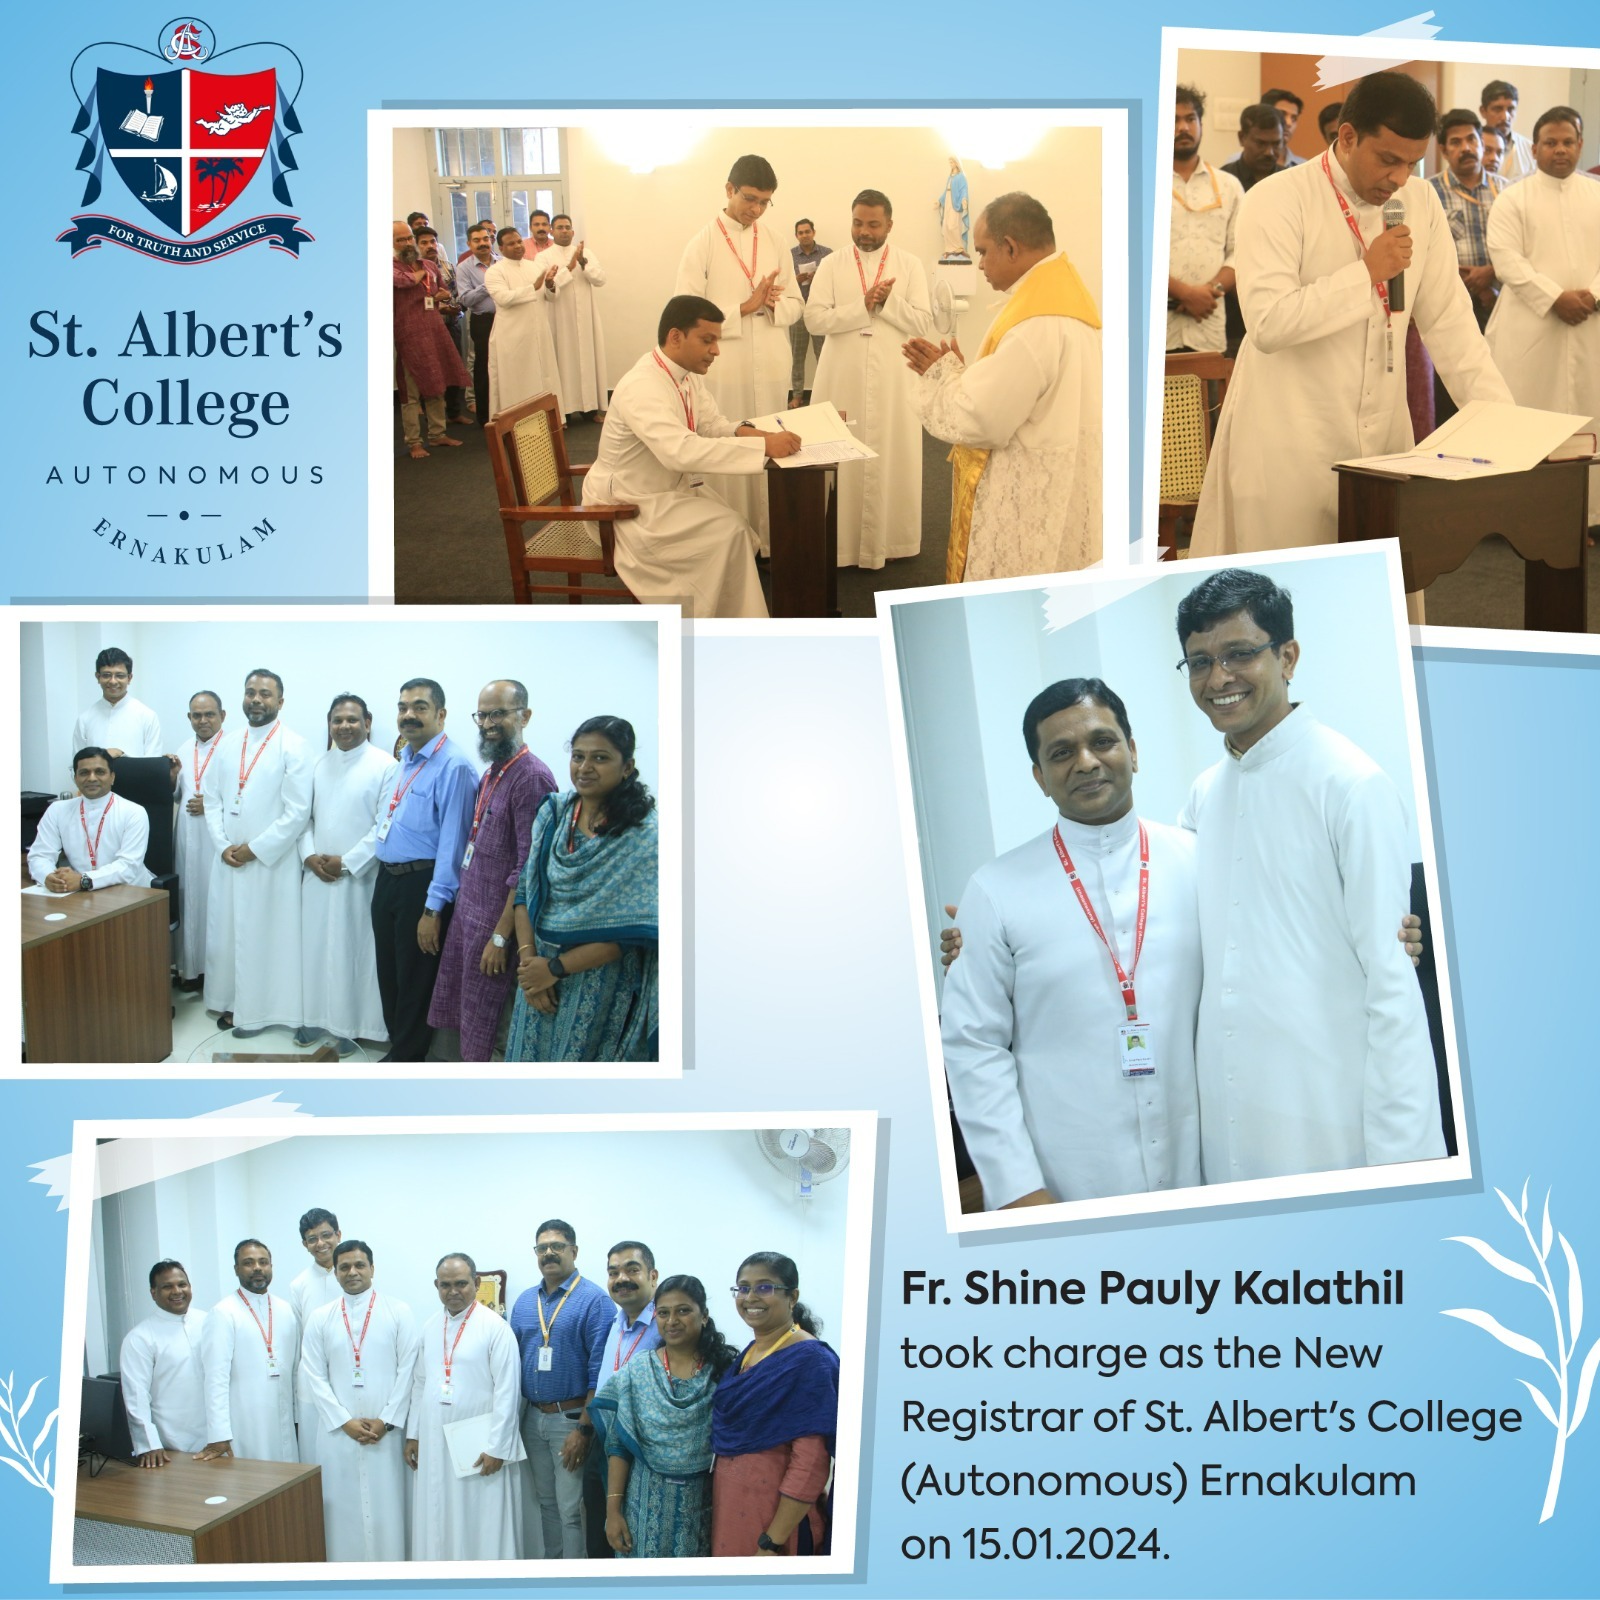 Fr. Shine Pauly Kalathil took charge as the New Registrar of St. Albert’s College (Autonomous)